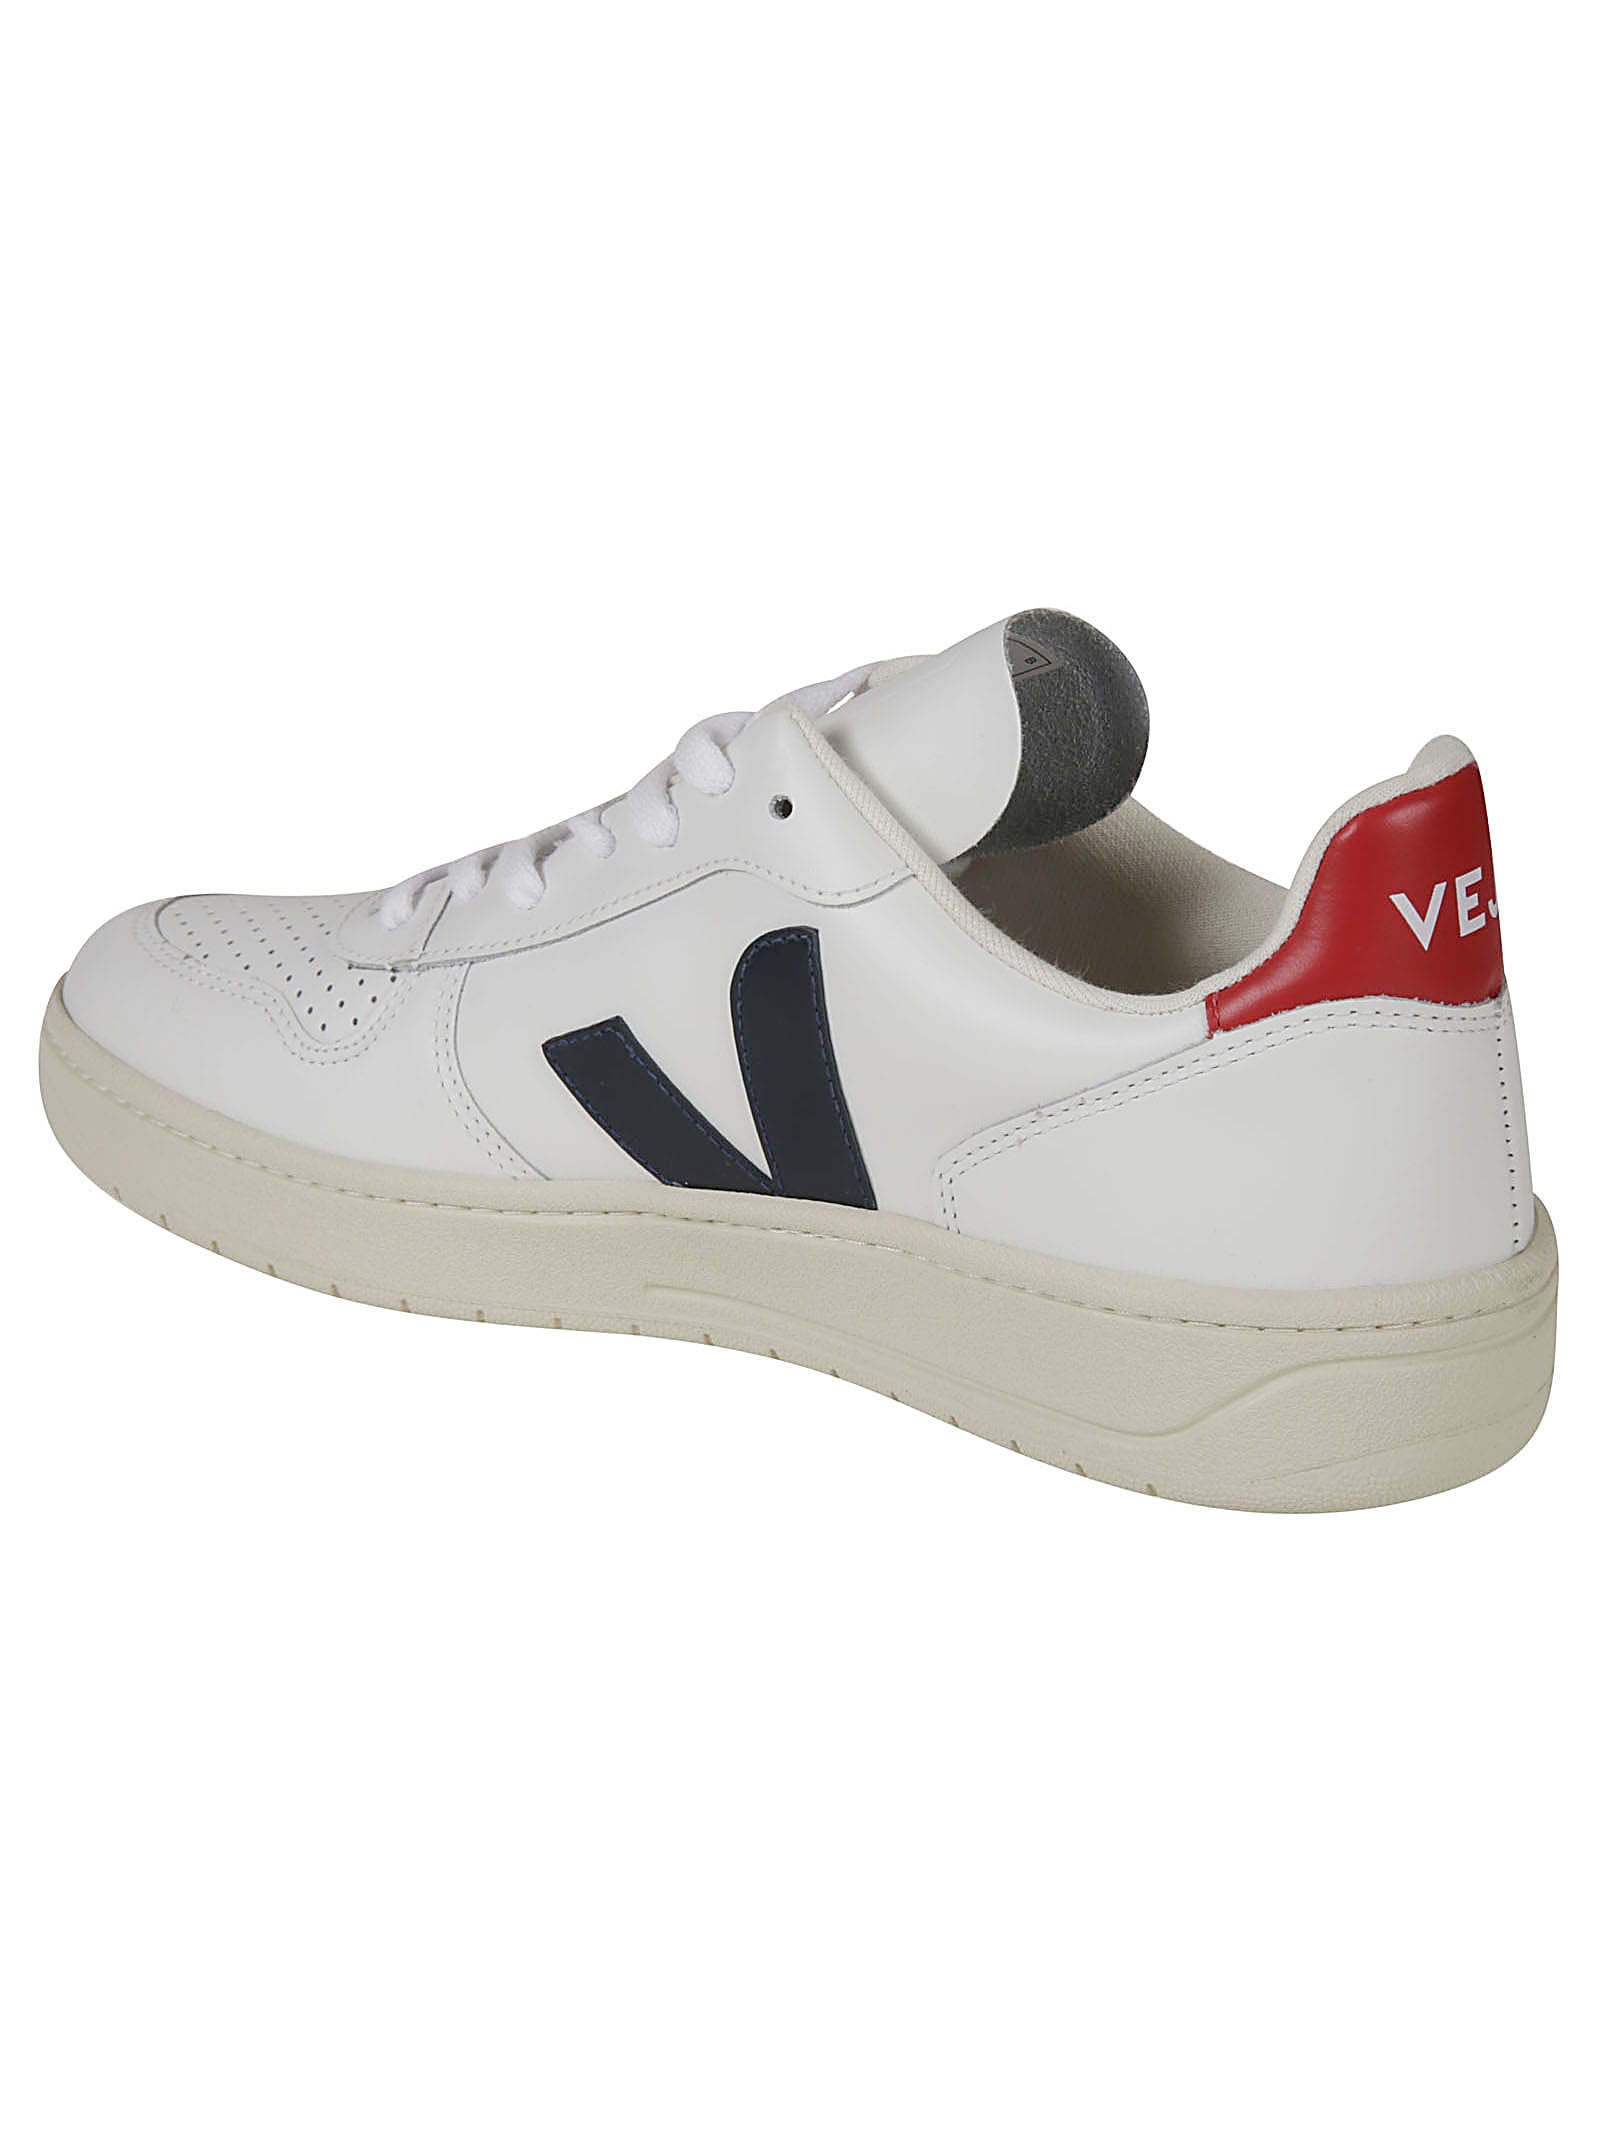 white sneakers with v on the side